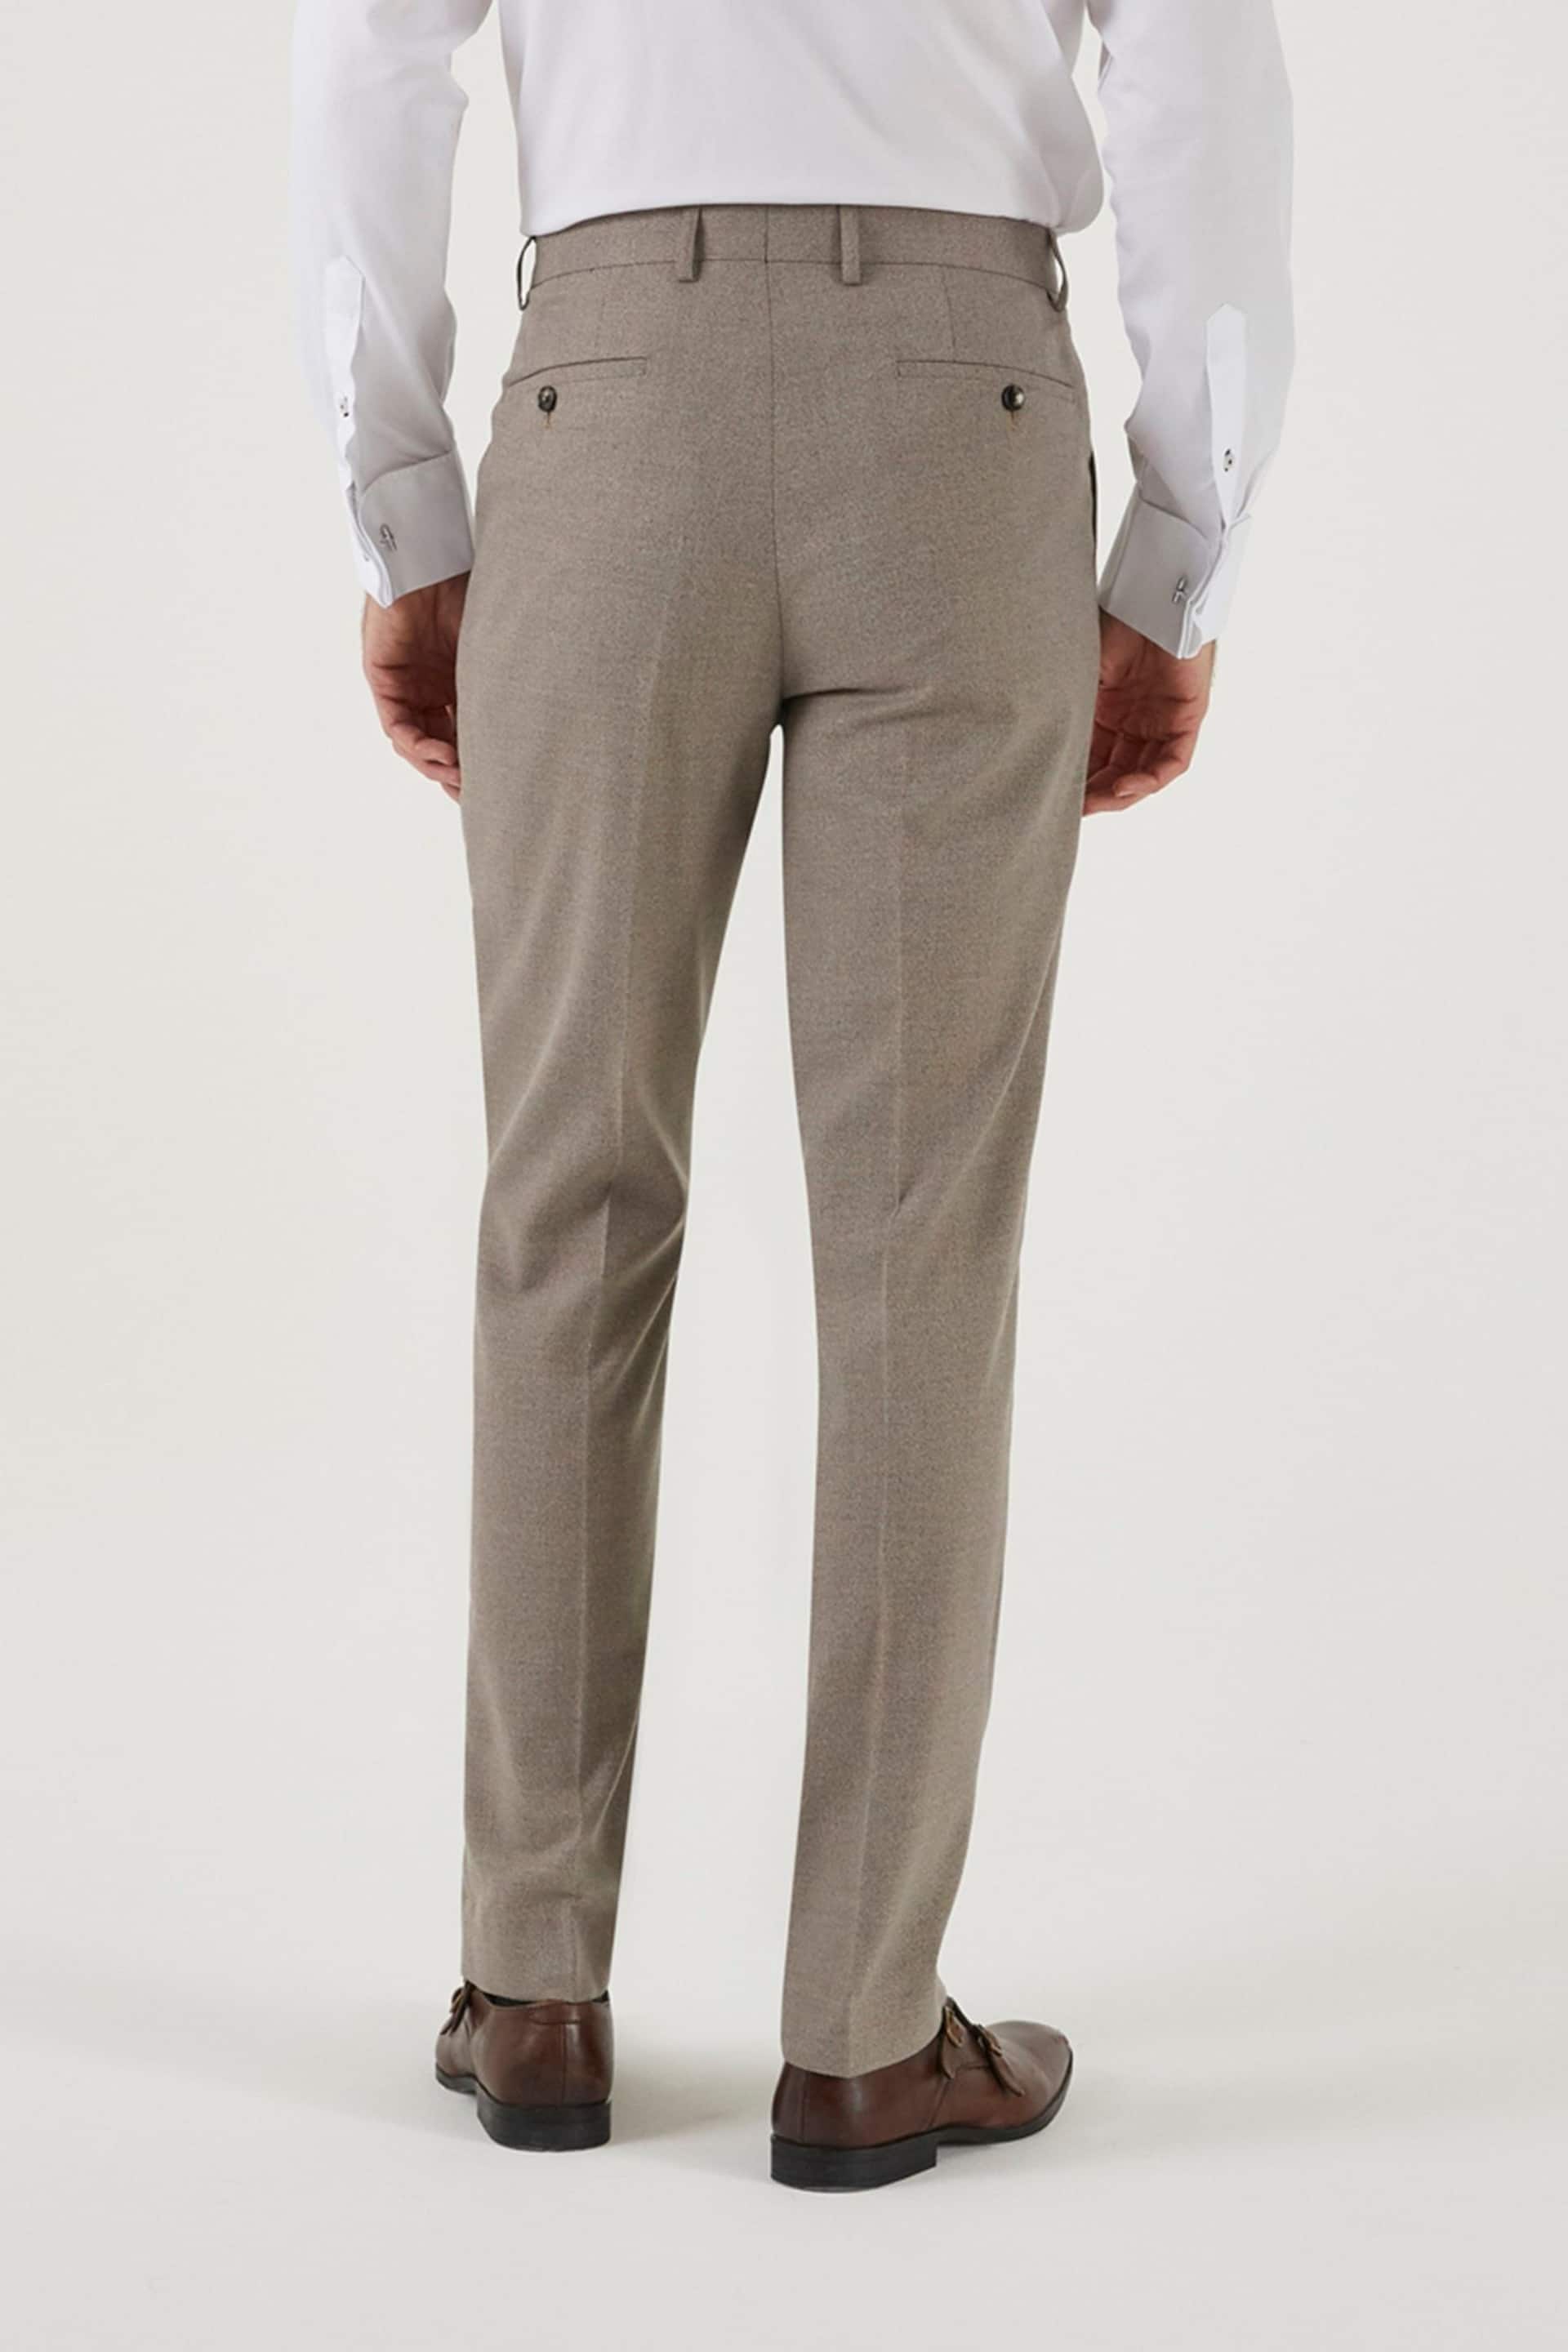 Skopes Tailored Fit Jodrell Marl Tweed Suit: Trousers - Image 2 of 4